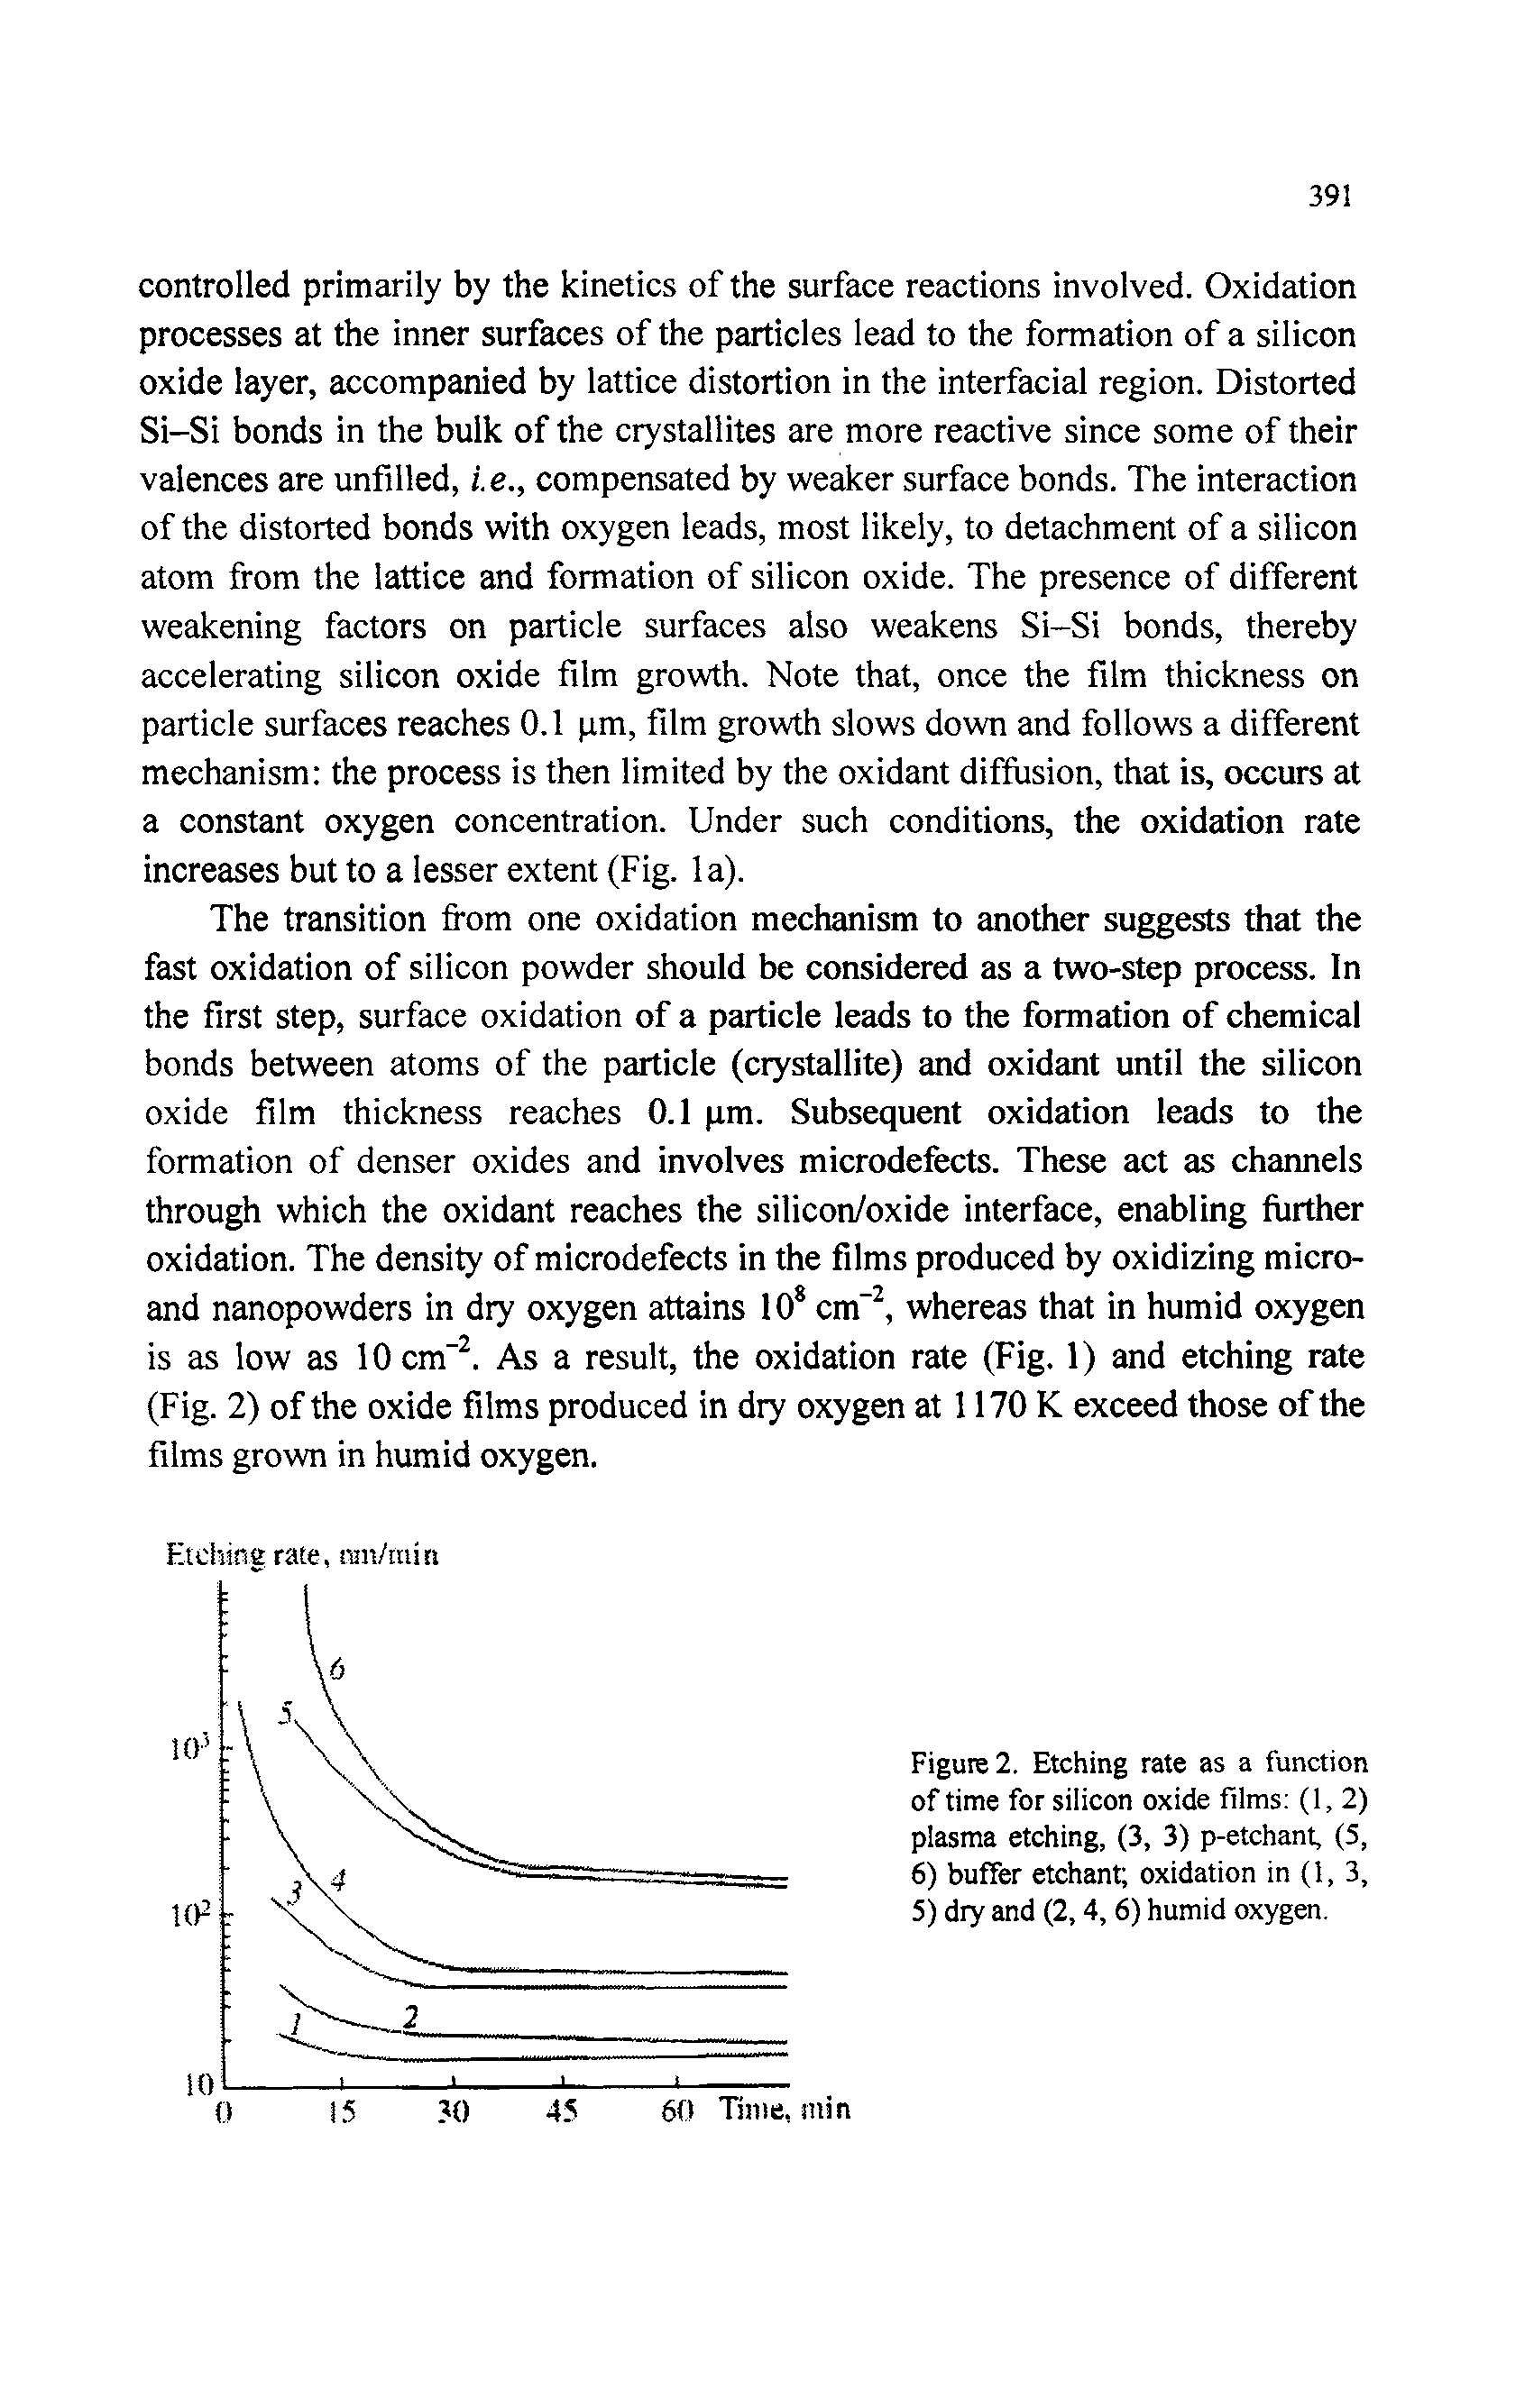 Figure 2. Etching rate as a function of time for silicon oxide films (1,2) plasma etching, (3, 3) p-etchant, (5, 6) buffer etchant oxidation in (1, 3, 5) dry and (2,4, 6) humid oxygen.